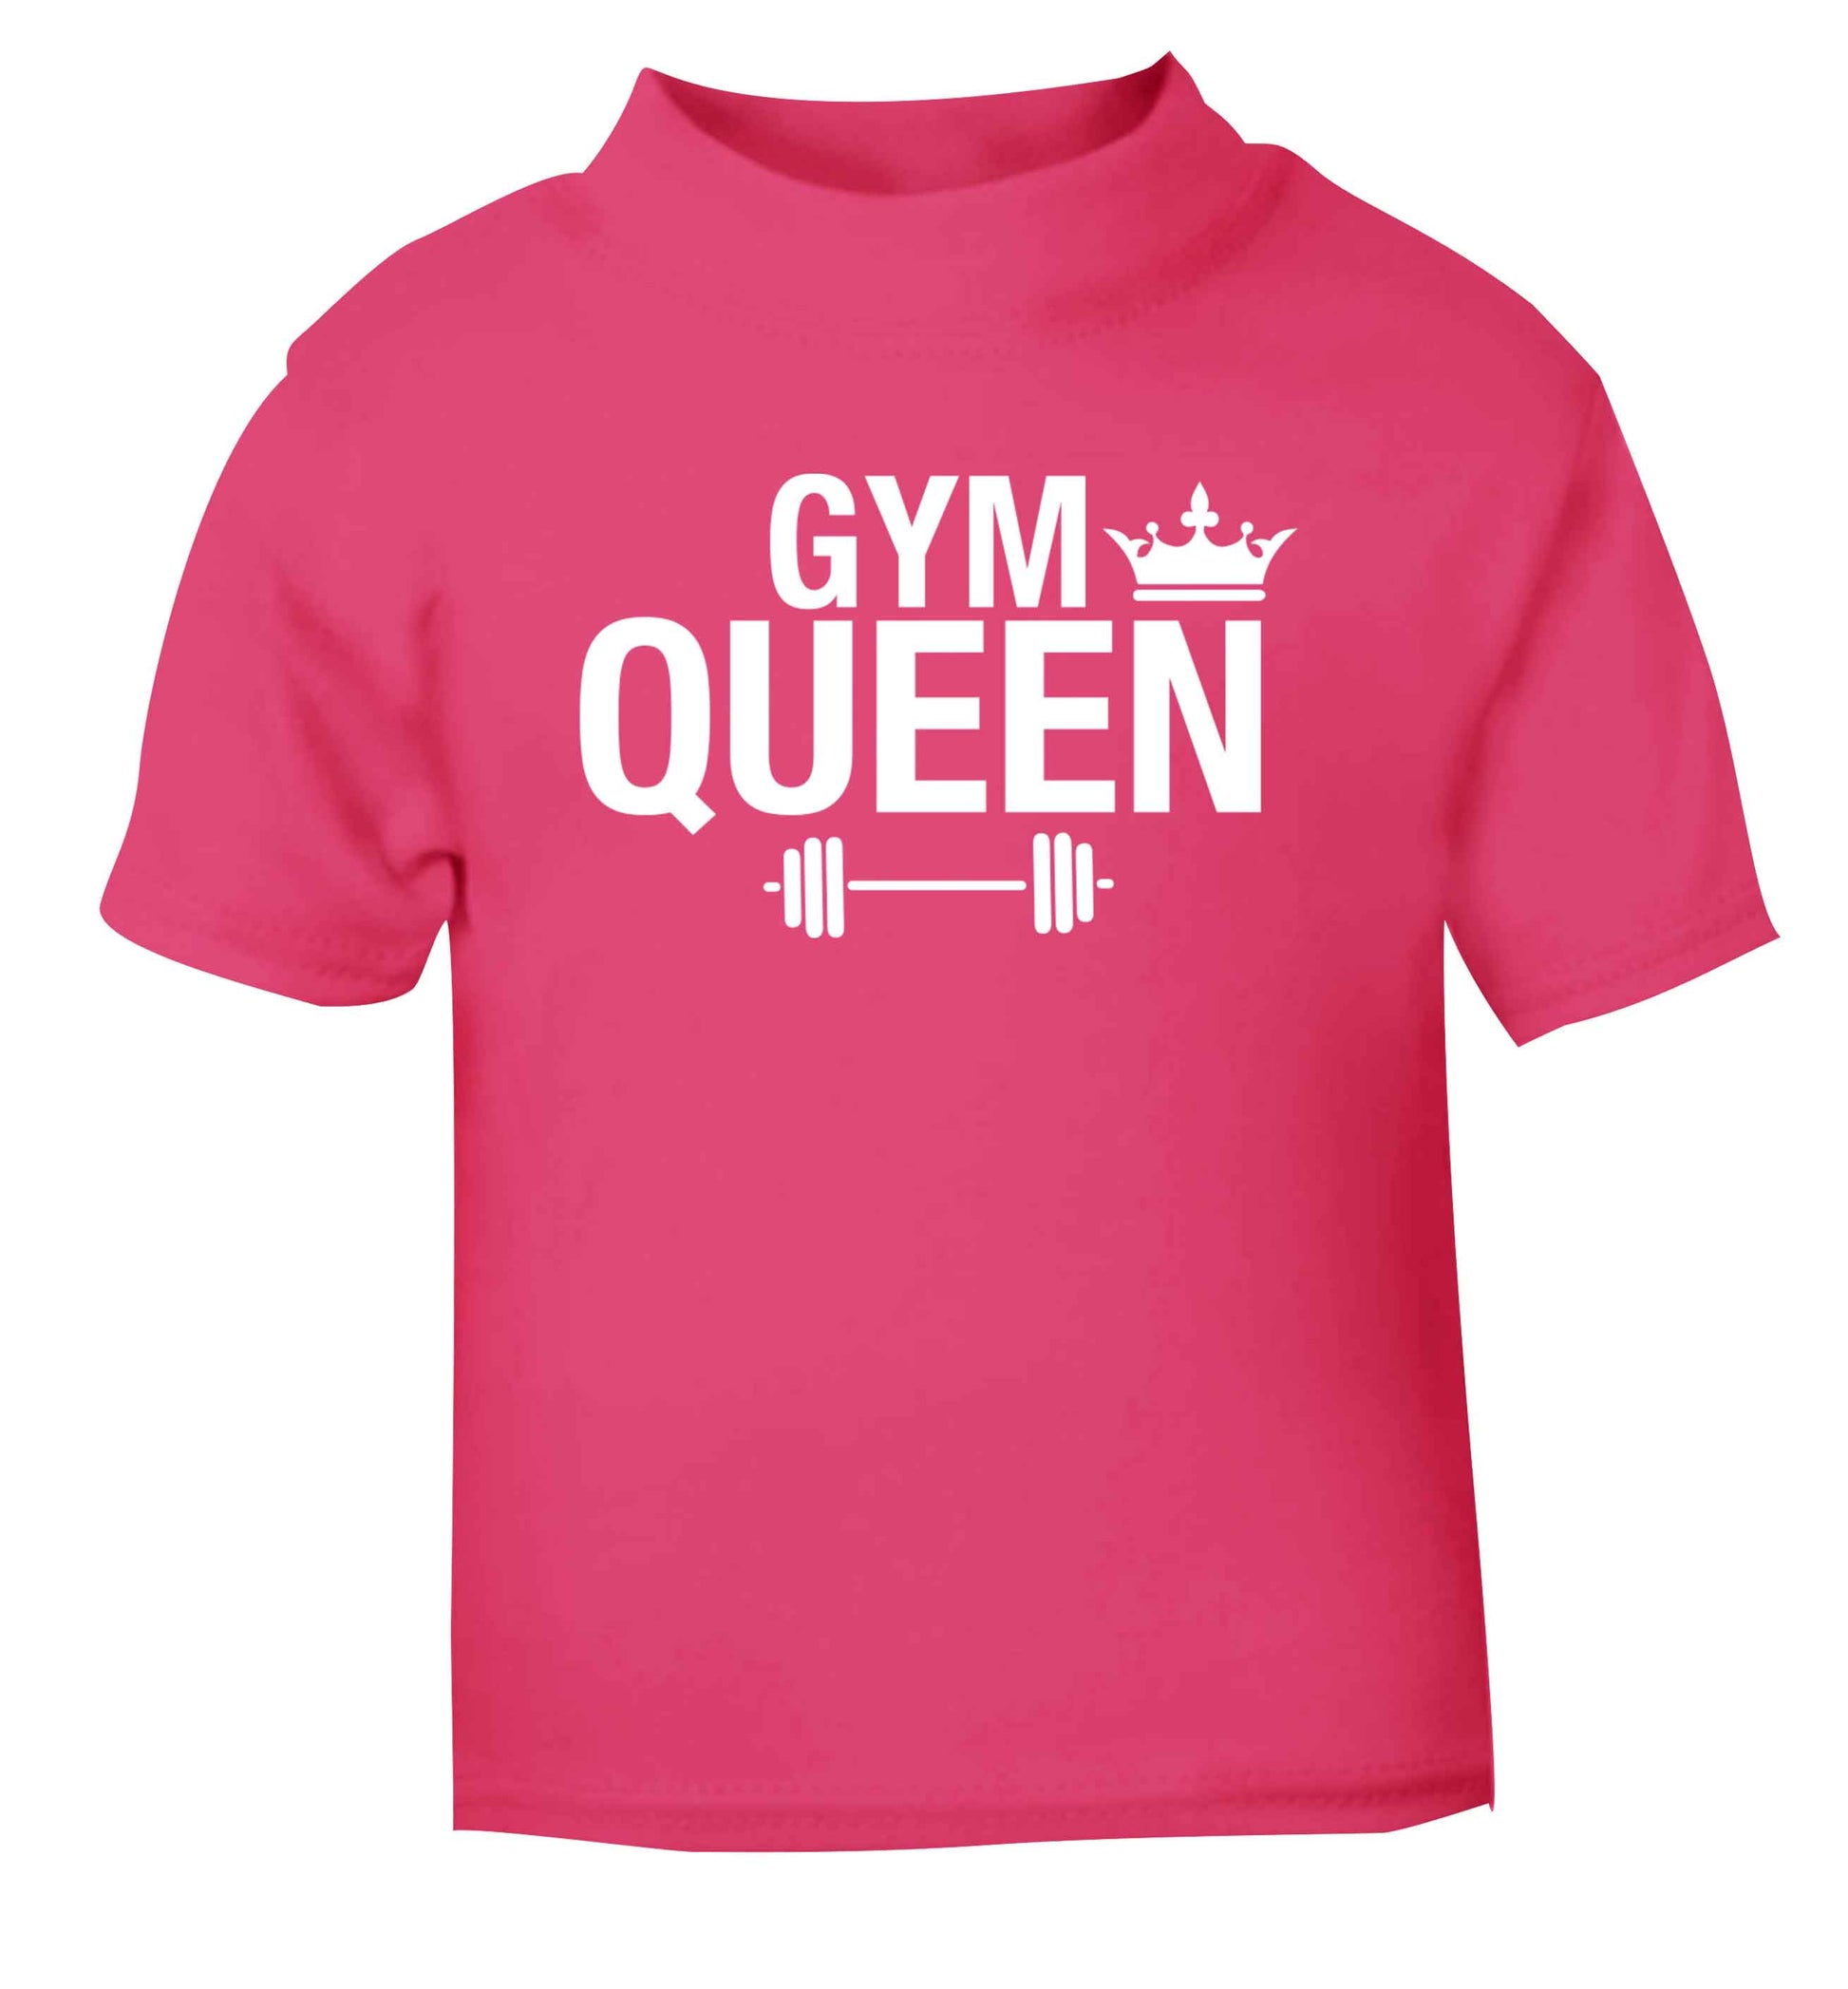 Gym queen pink Baby Toddler Tshirt 2 Years